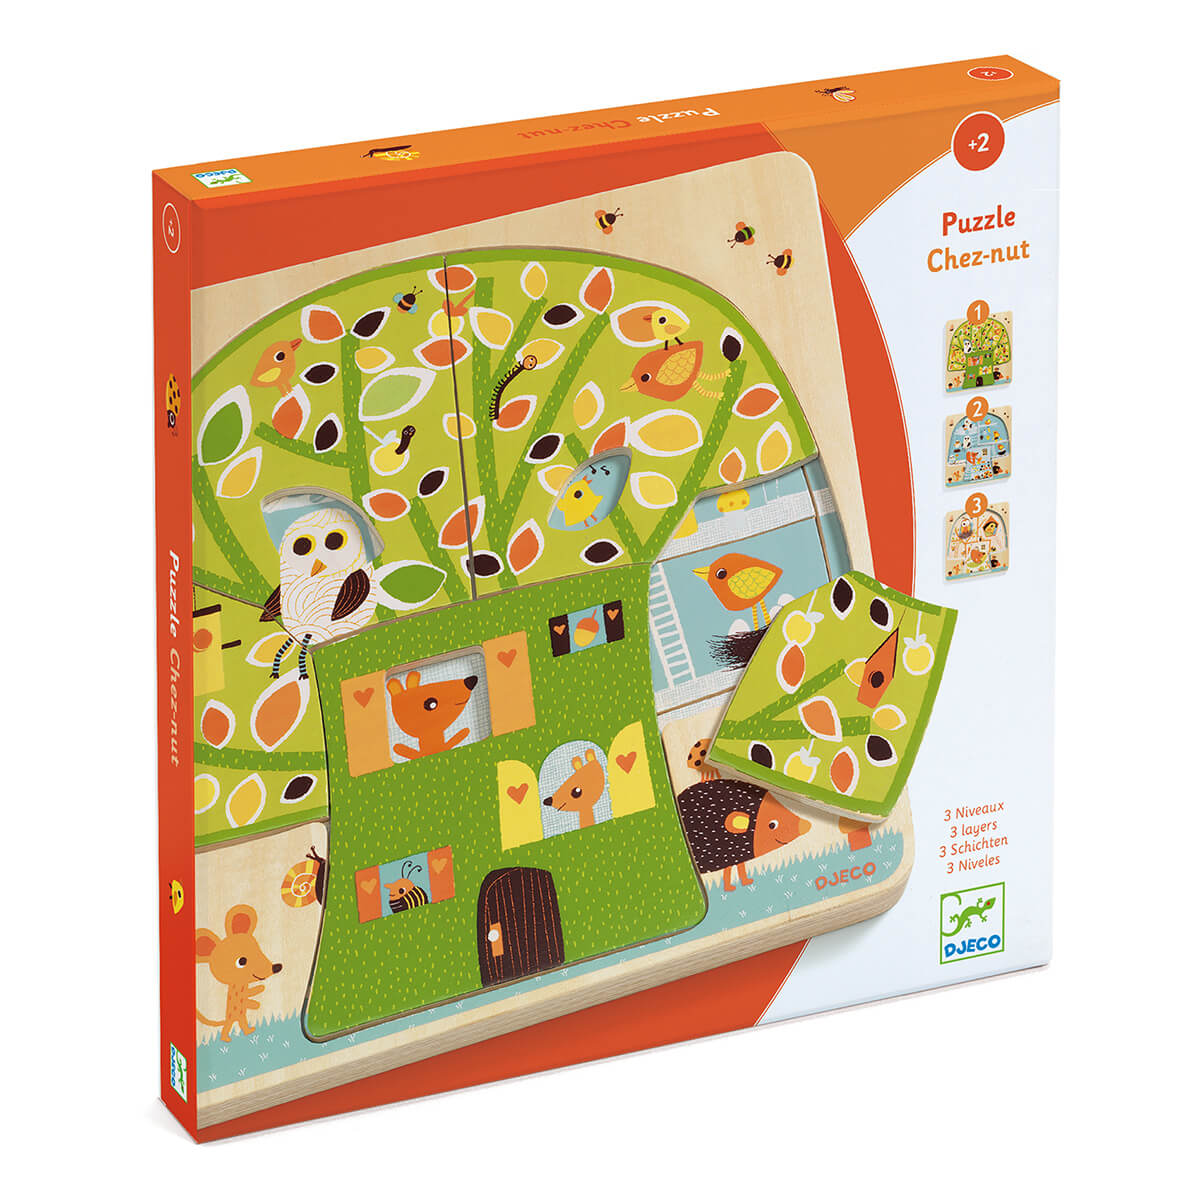 Chez Nut 3 Layer Wooden Puzzle by Djeco – Junior Edition